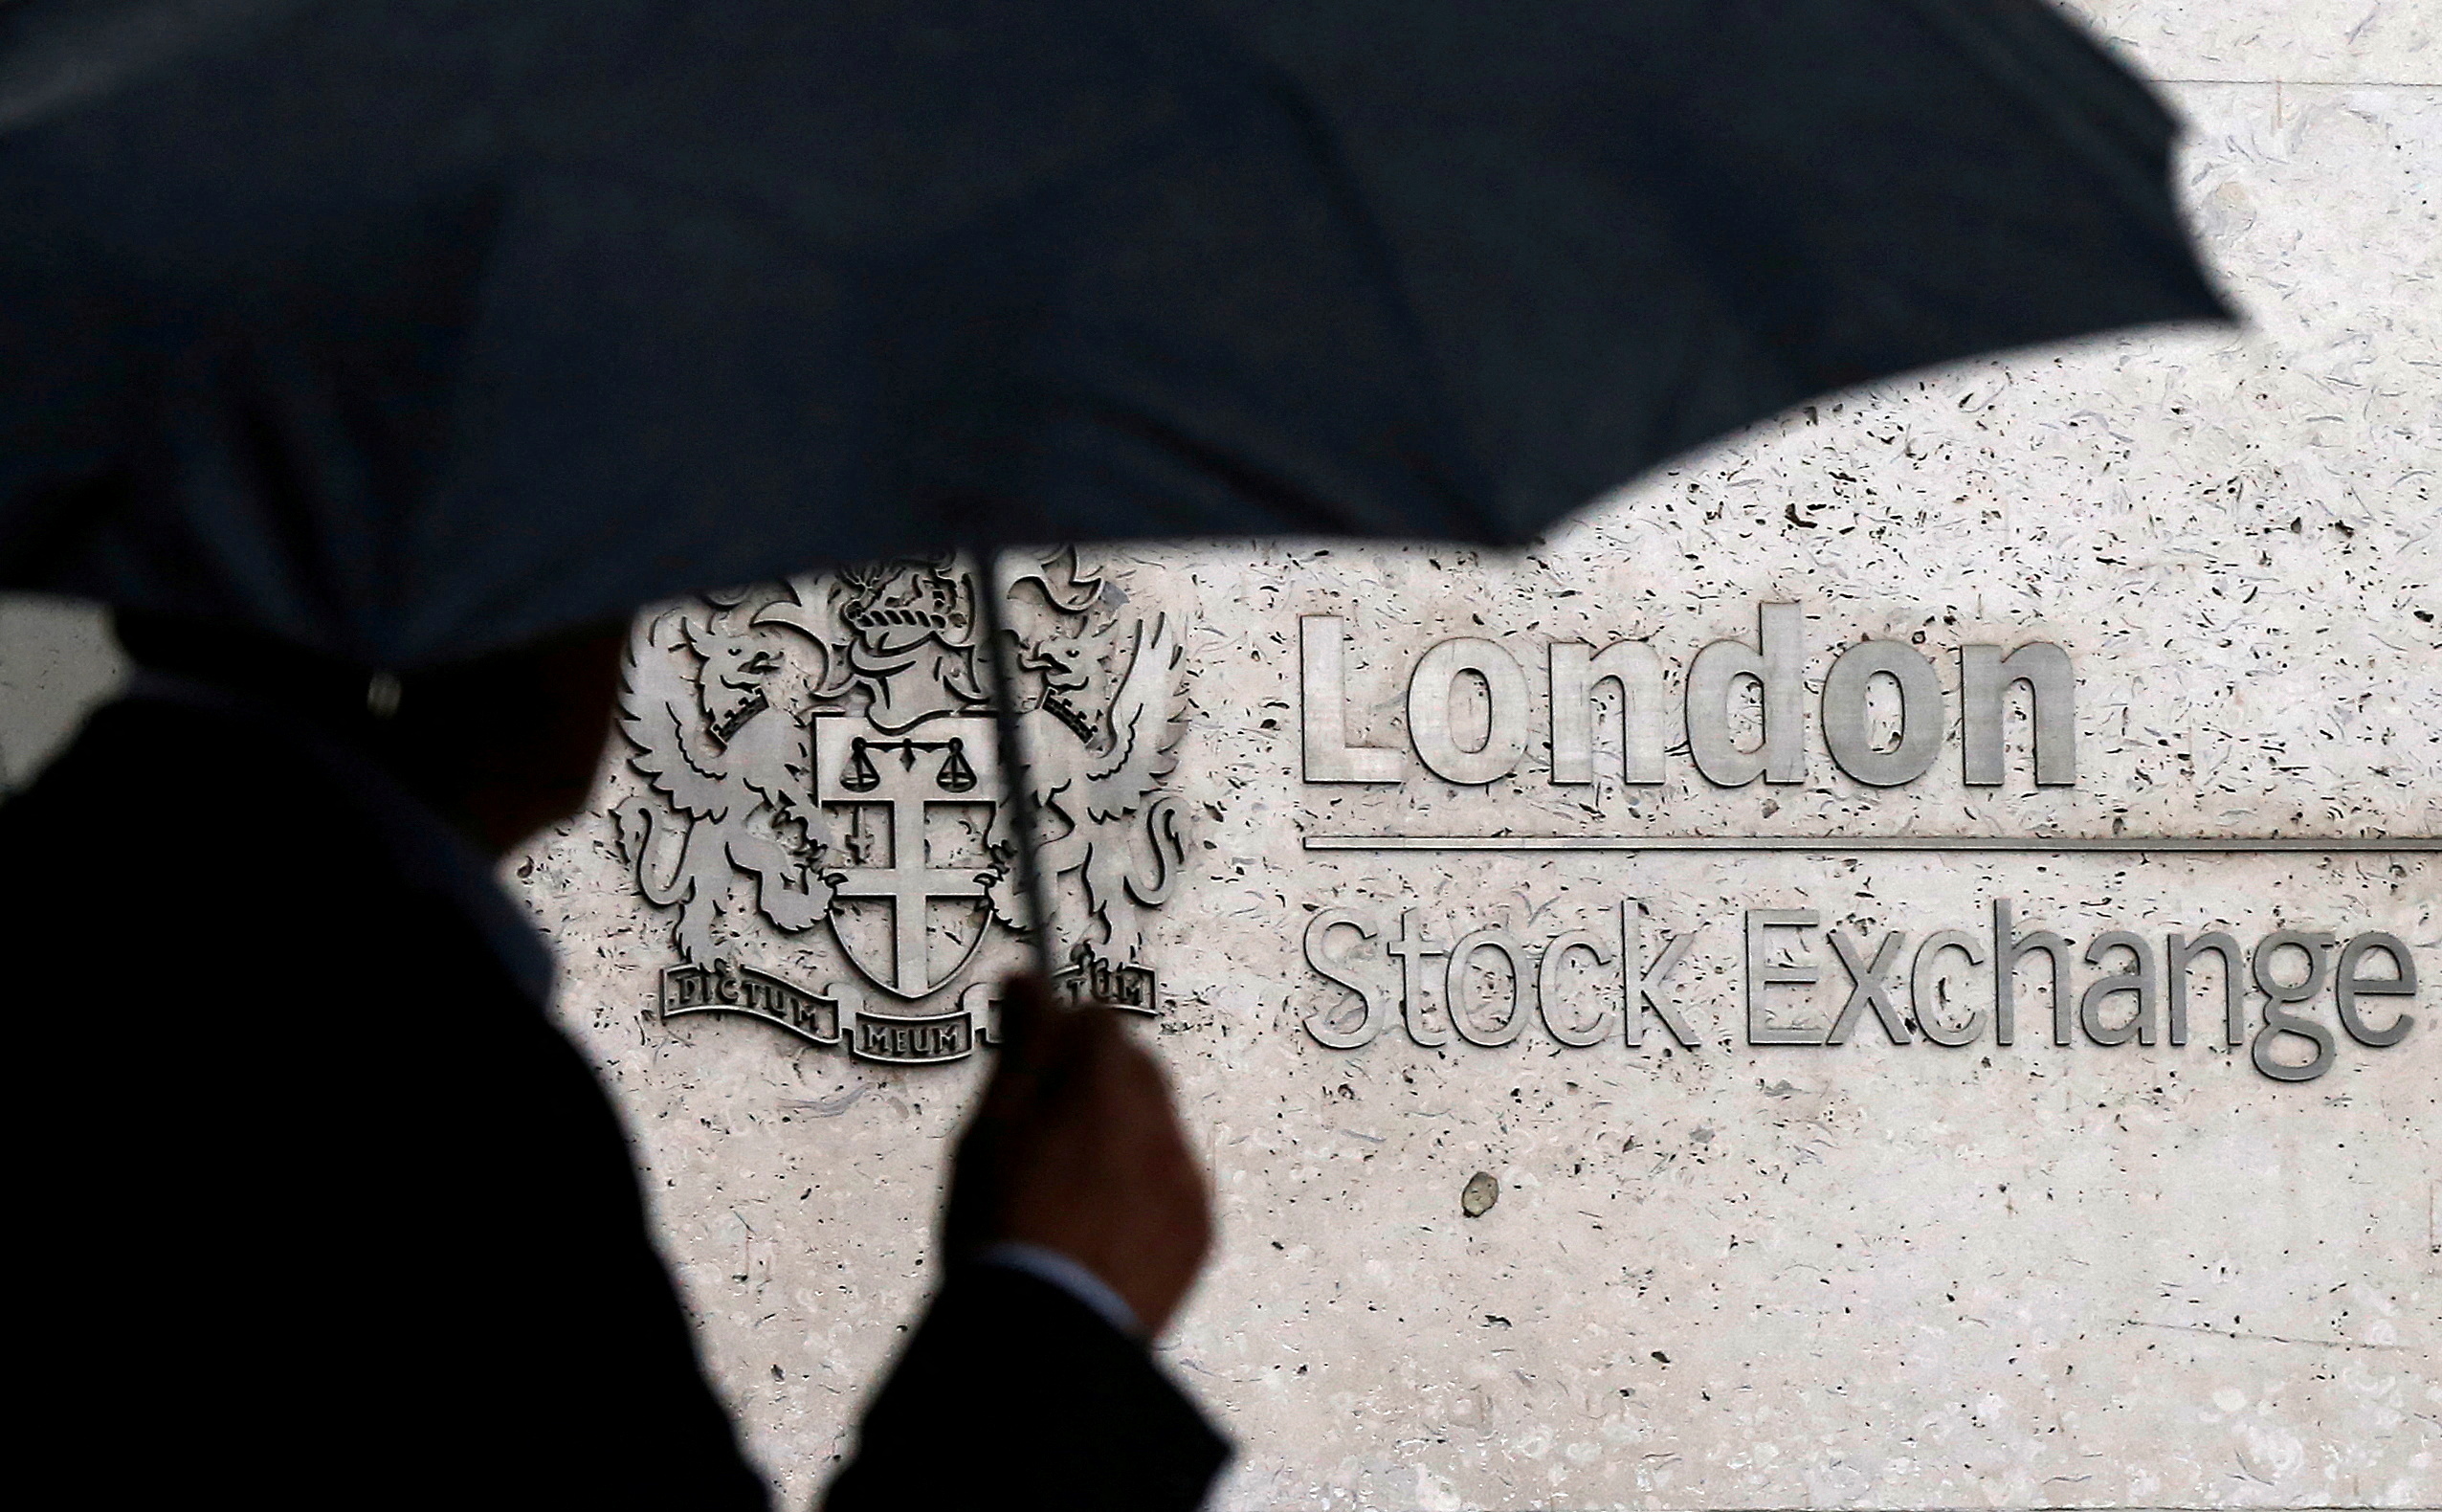 A man shelters under an umbrella as he walks past the London Stock Exchange